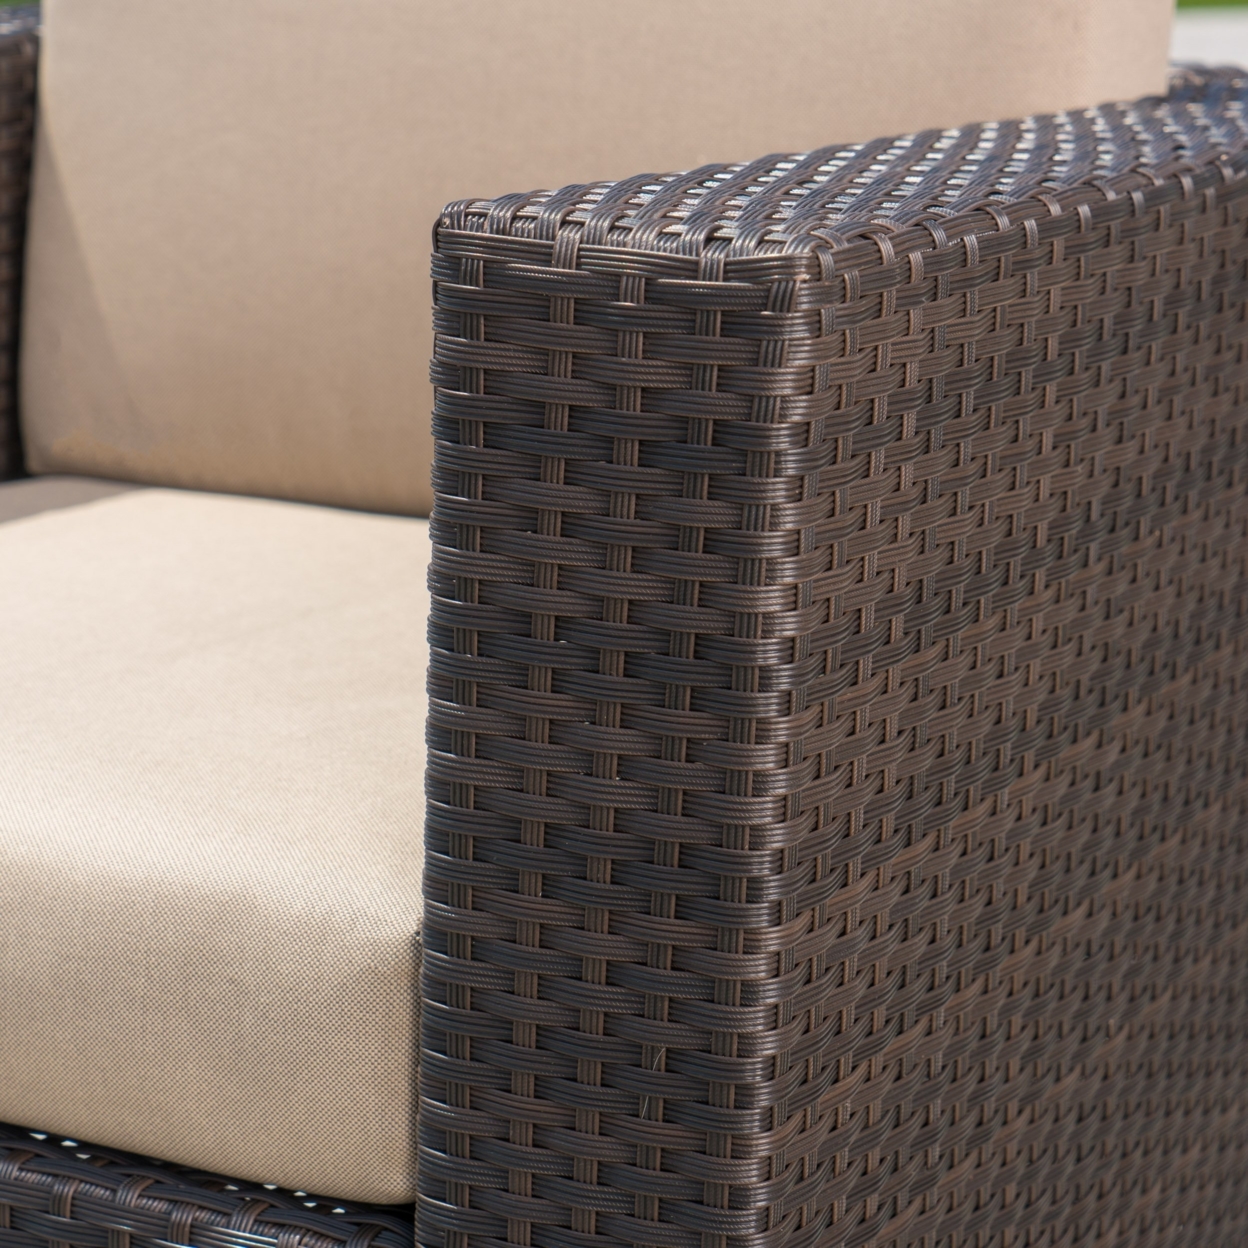 Venice Outdoor Wicker Swivel Club Chair With Water Resistant Cushions - Dark Brown/beige, Single